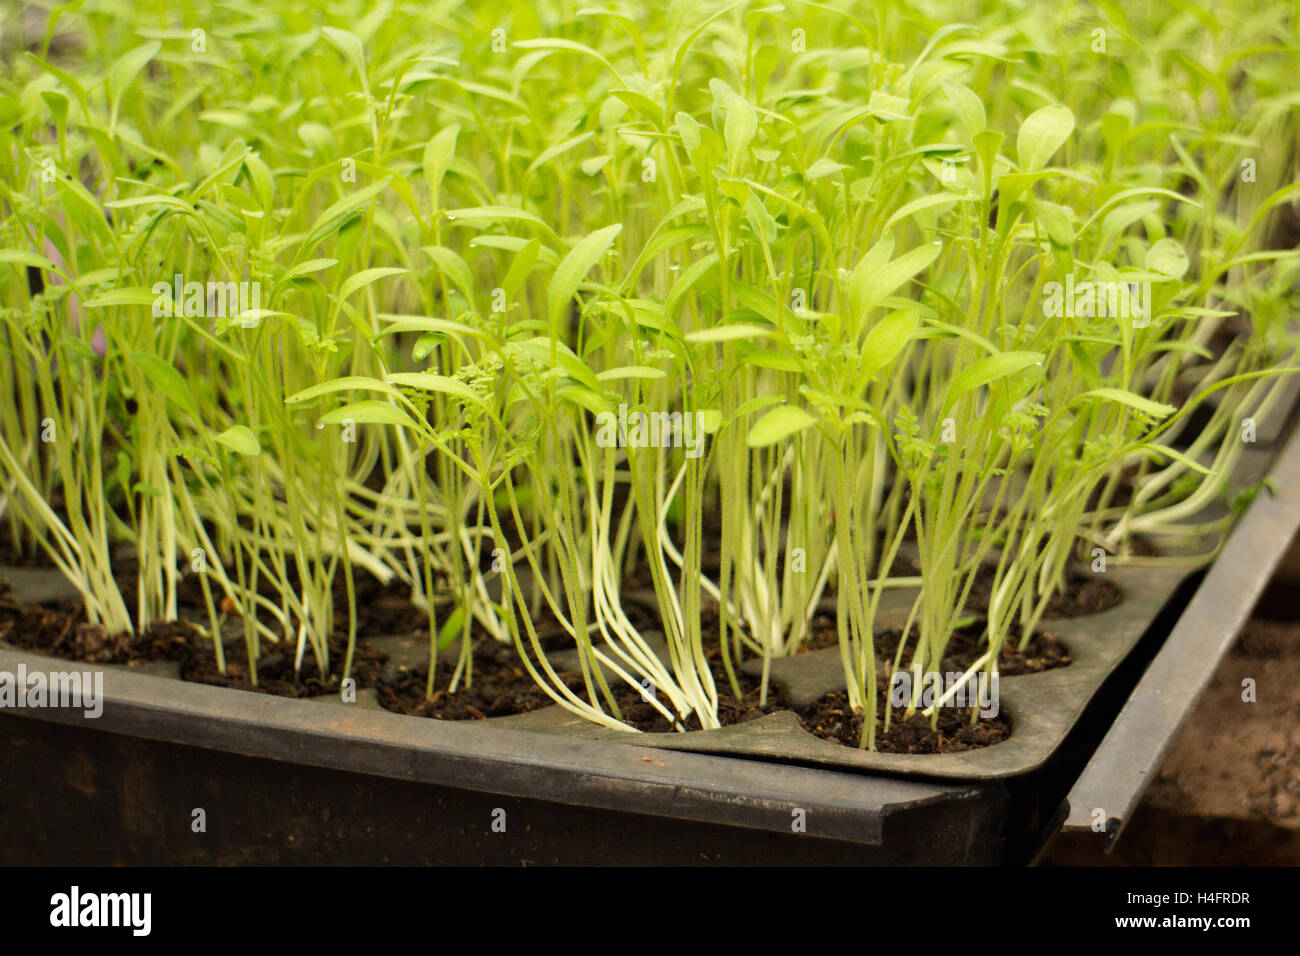 Wispy green baby plants that are growing in a tray of soil ready to be transplanted, farm inspired Stock Photo